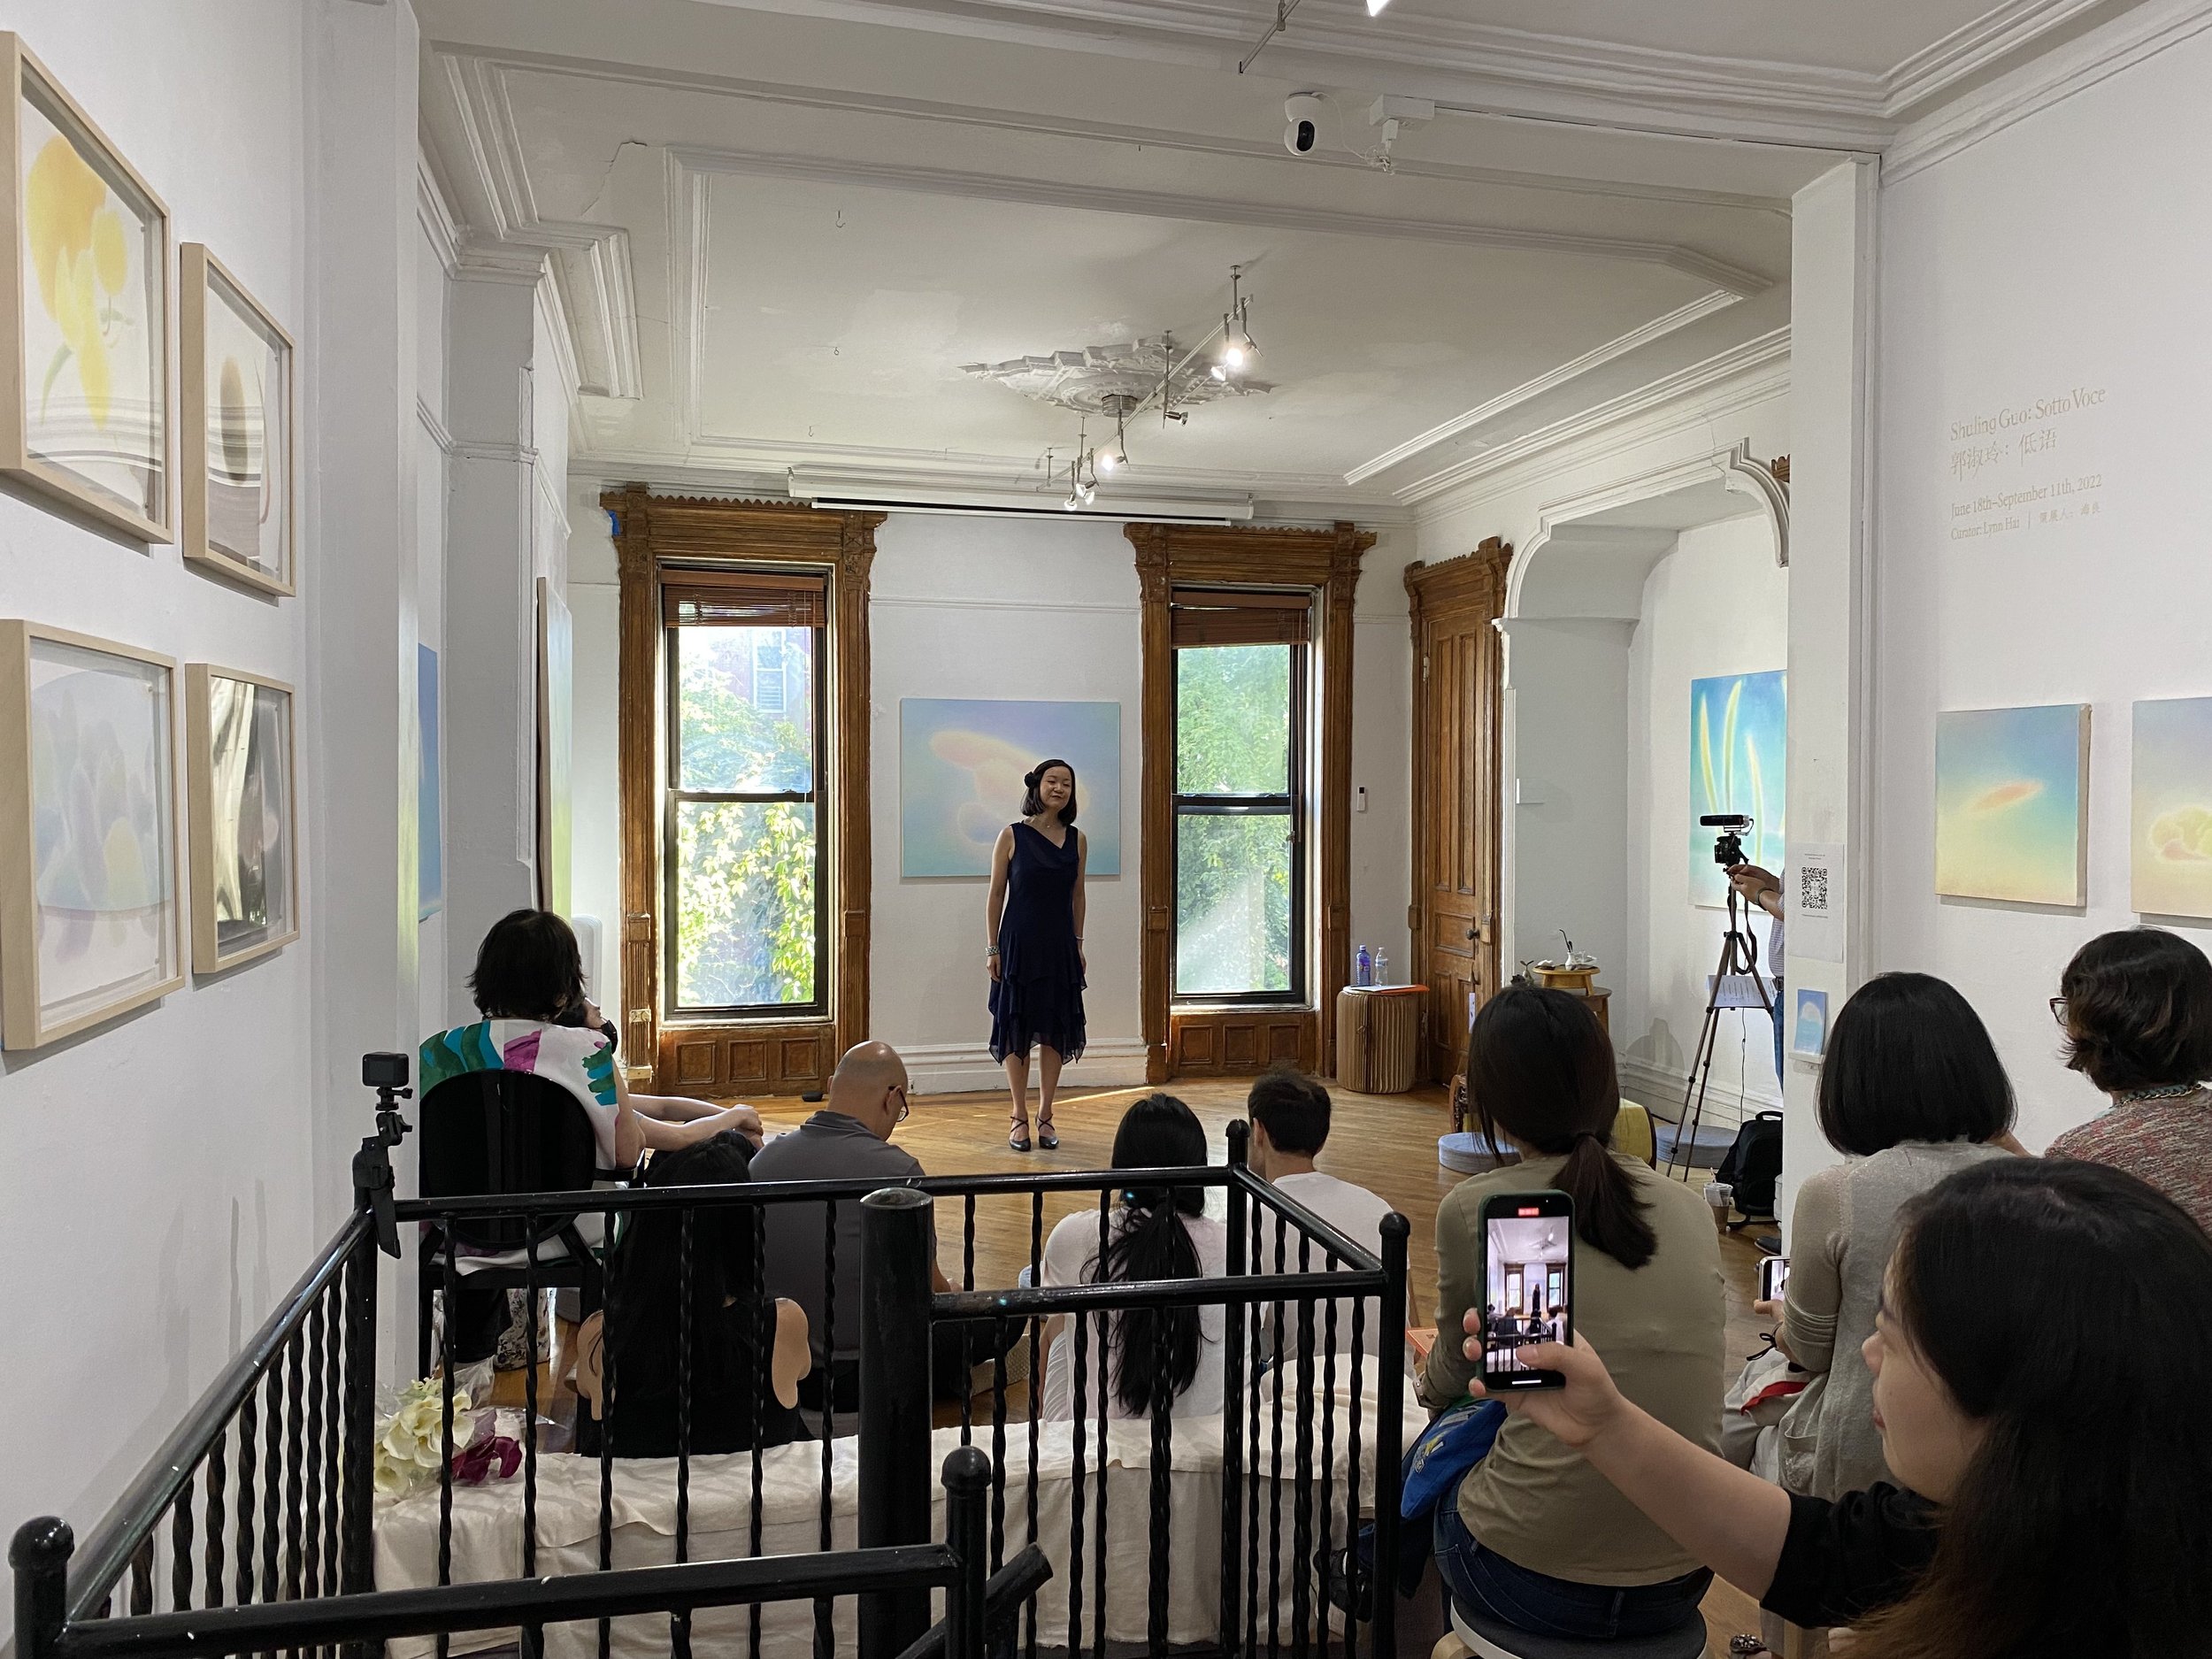  Classical Voice Performance on September 10th, 2020. Photo by Barbara Song, courtesy of Fou Gallery  